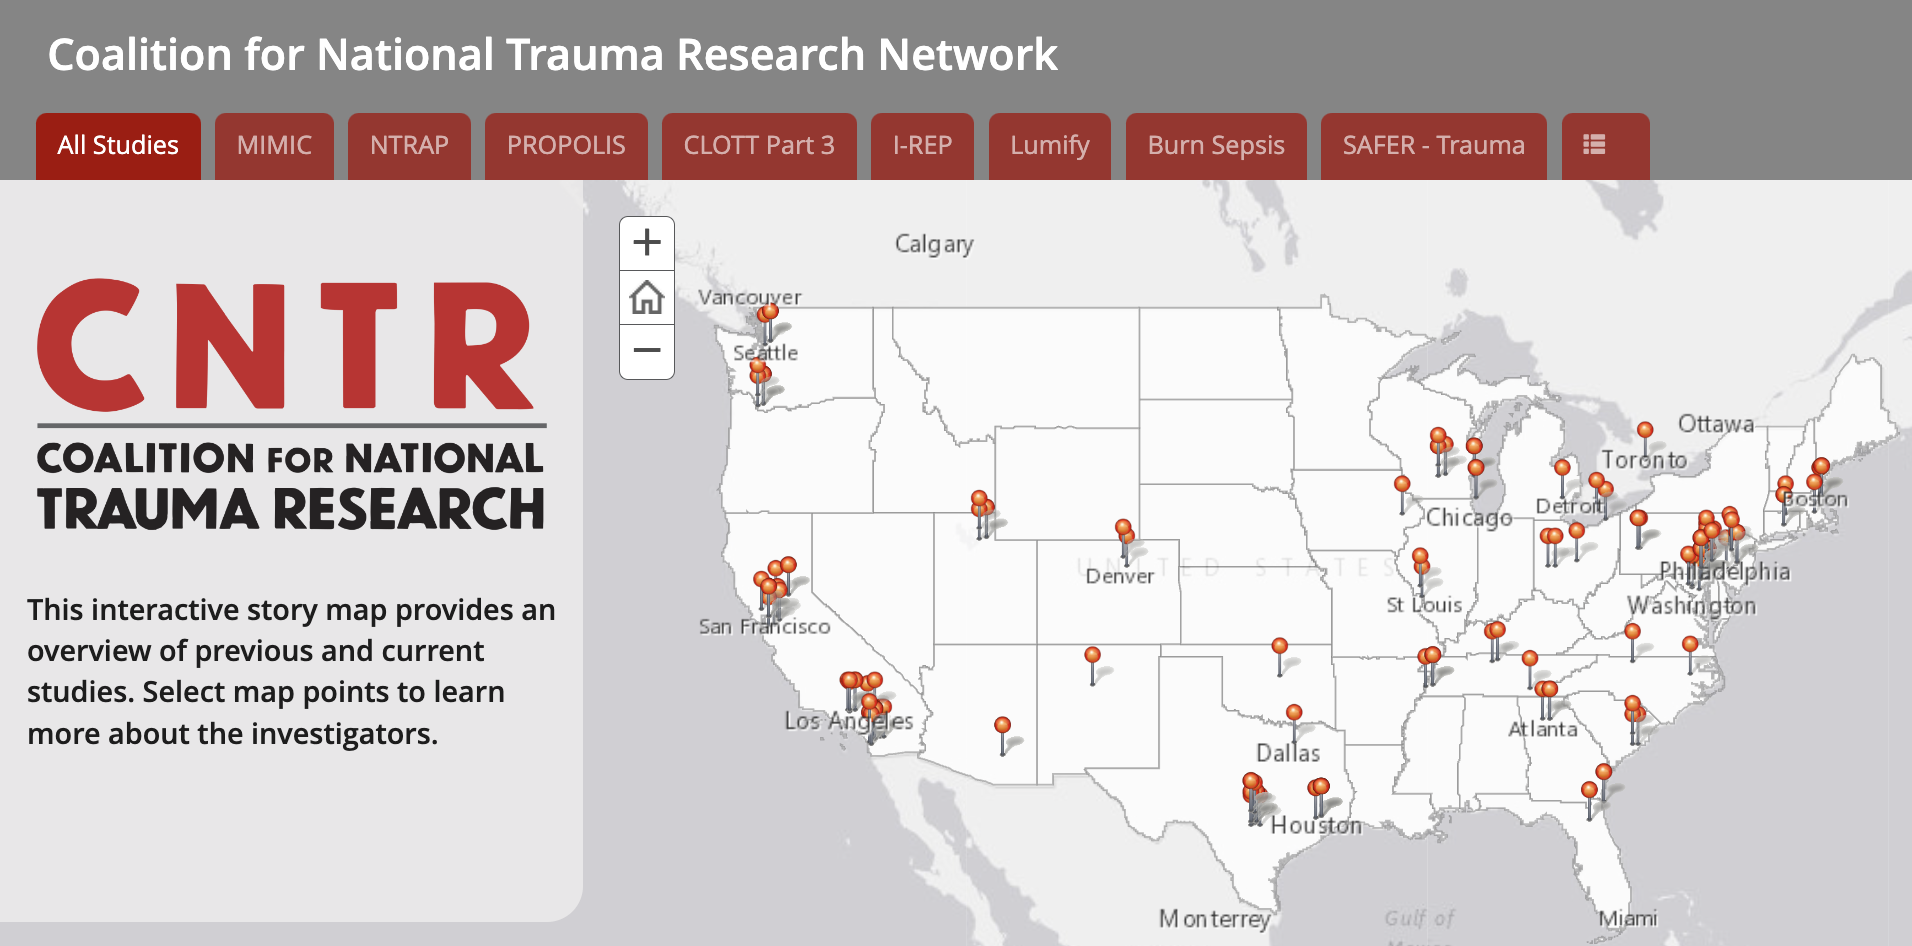 Coalition for National Trauma Research